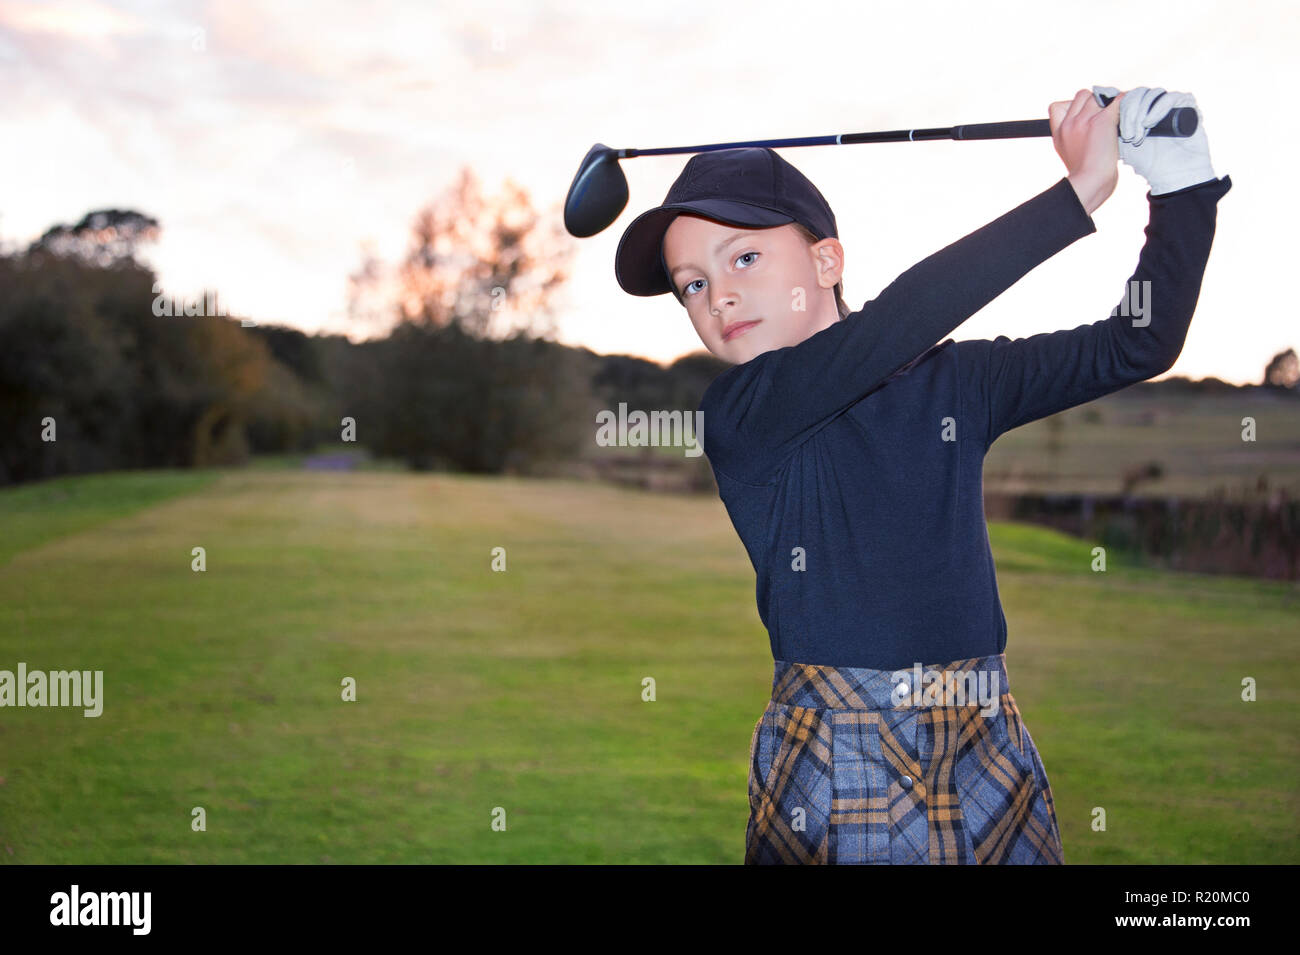 A junior female golfer at the end of her golf swing. Stock Photo